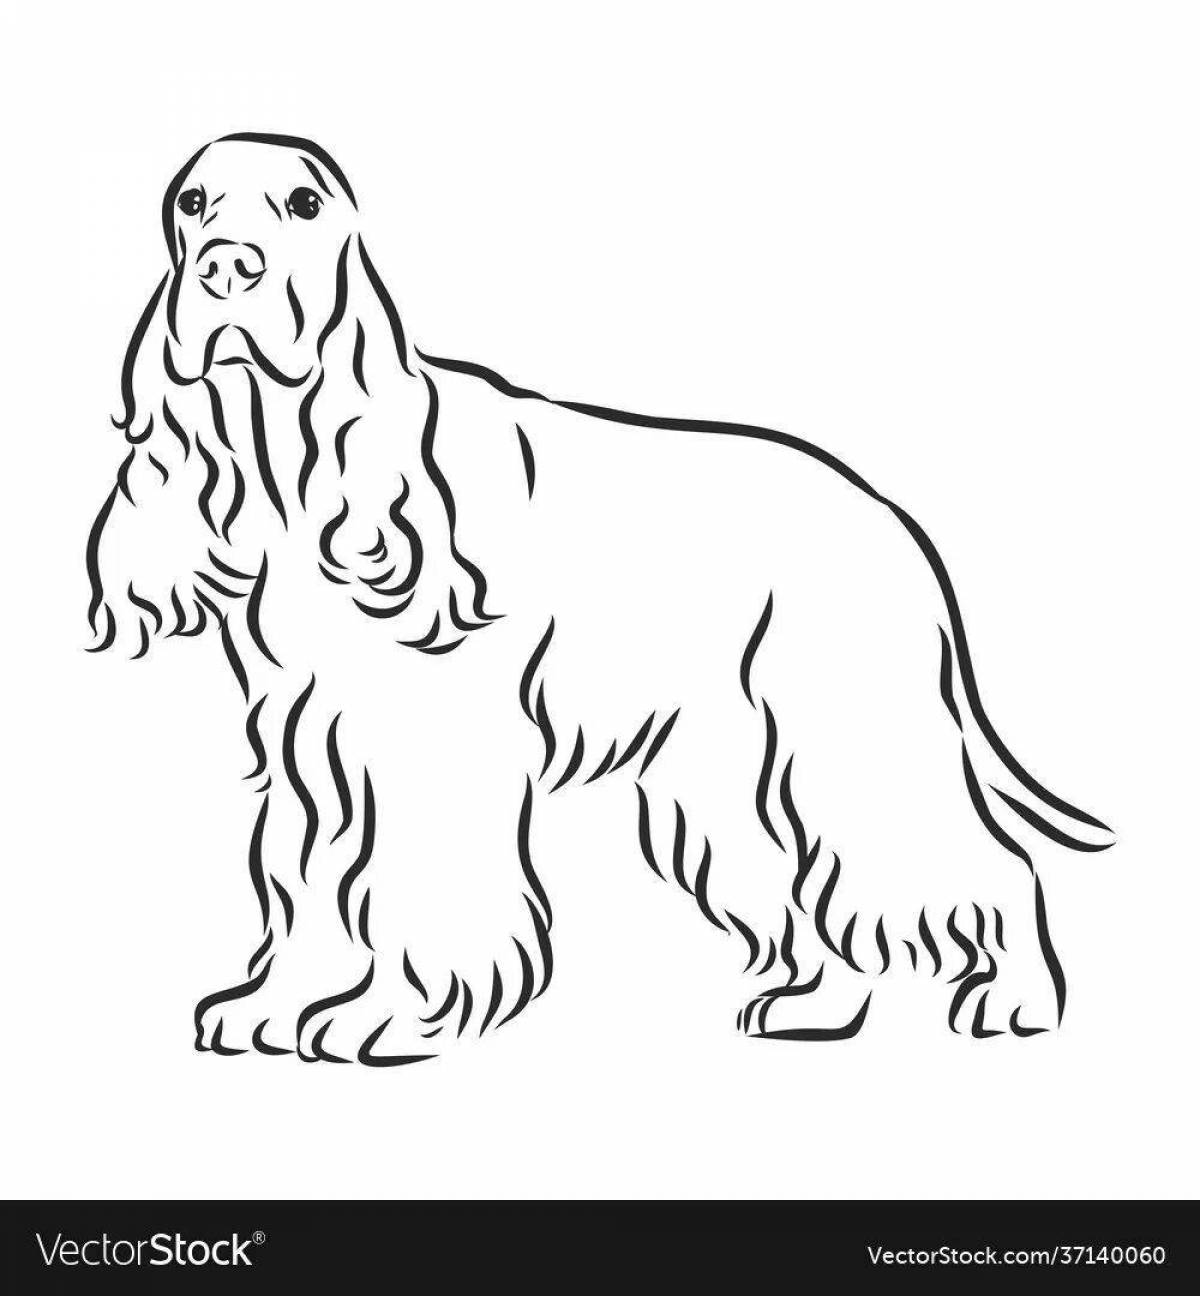 Coloring page of a charming english cocker spaniel